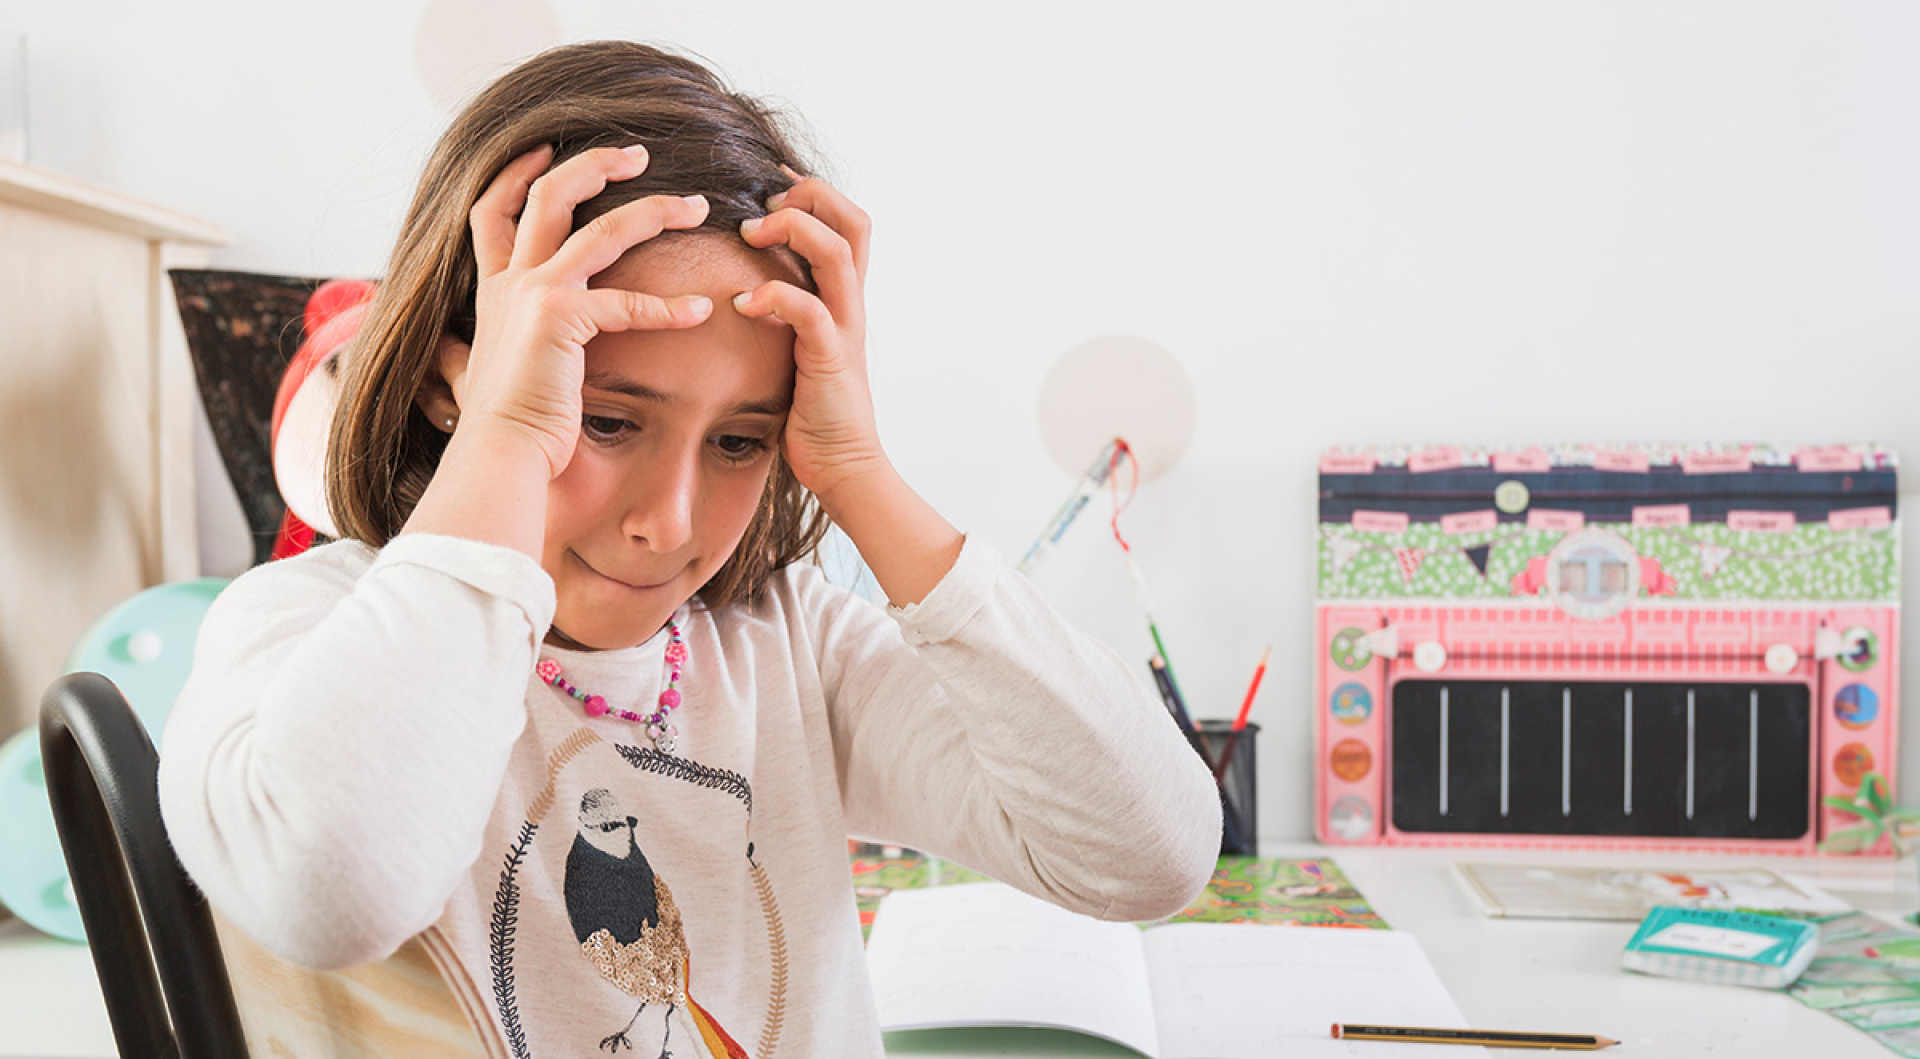 What To Do For Kids With High Anxiety About School